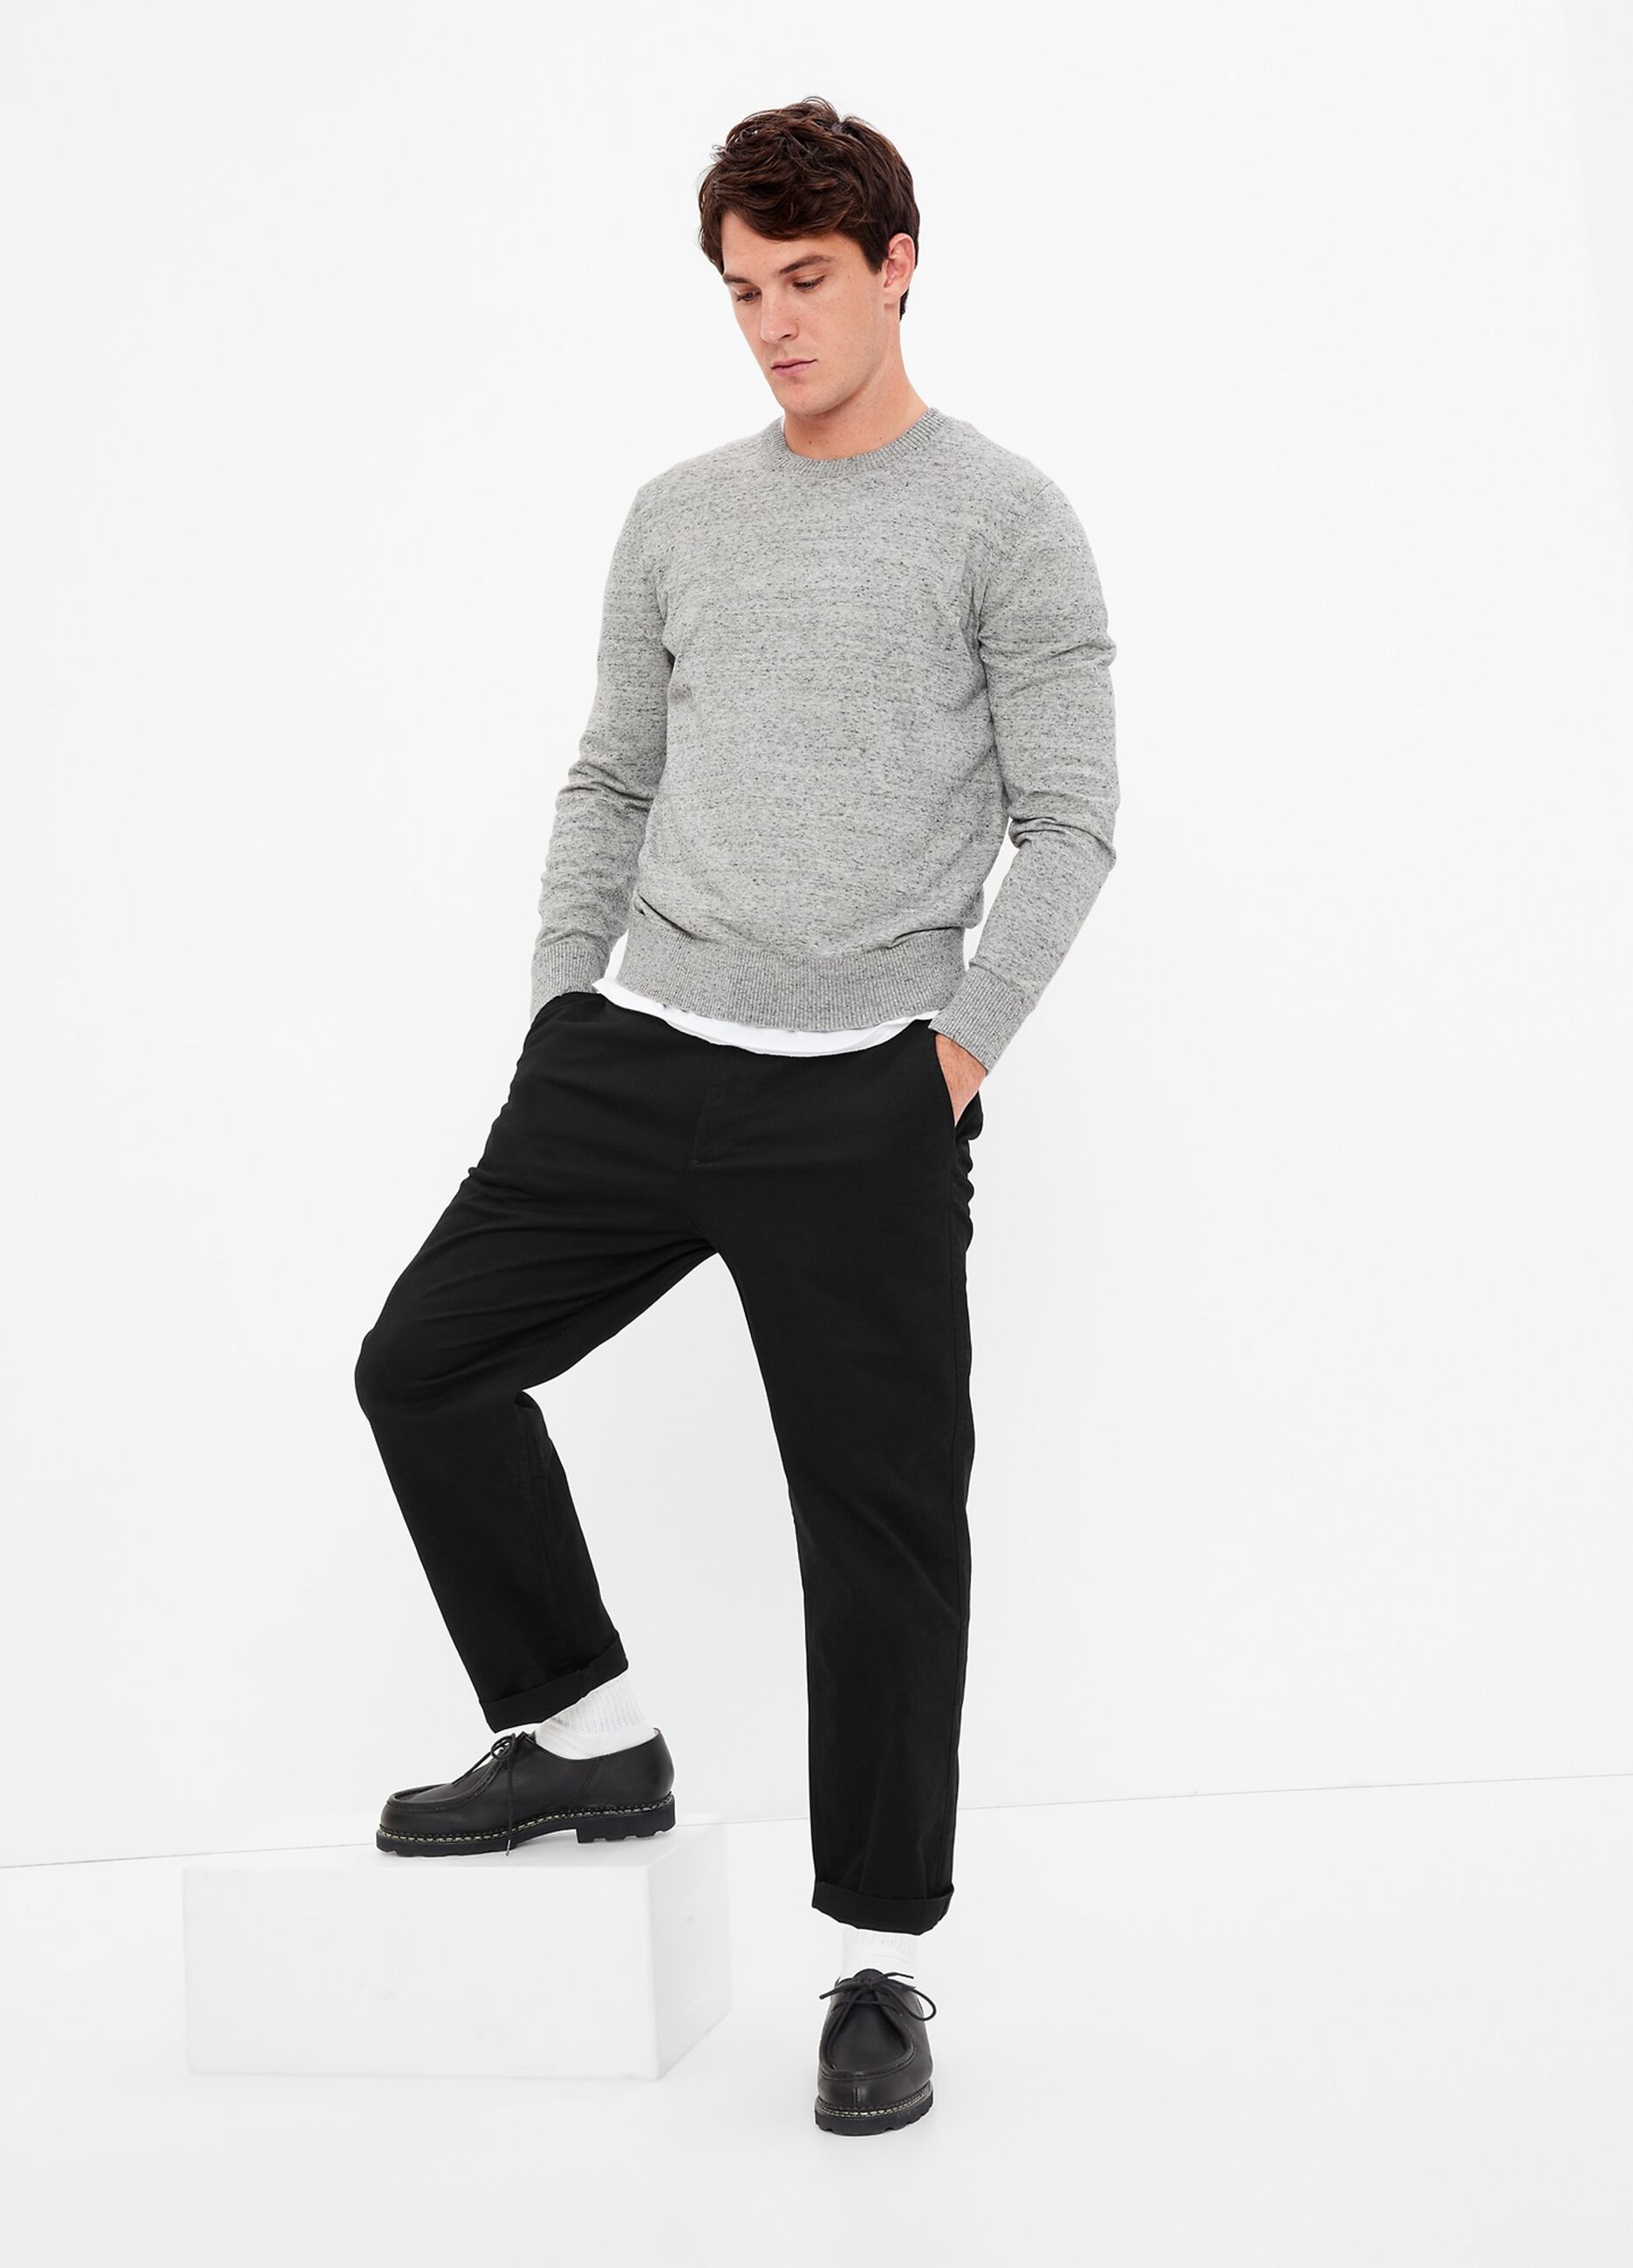 Mouliné-effect pullover with round neck